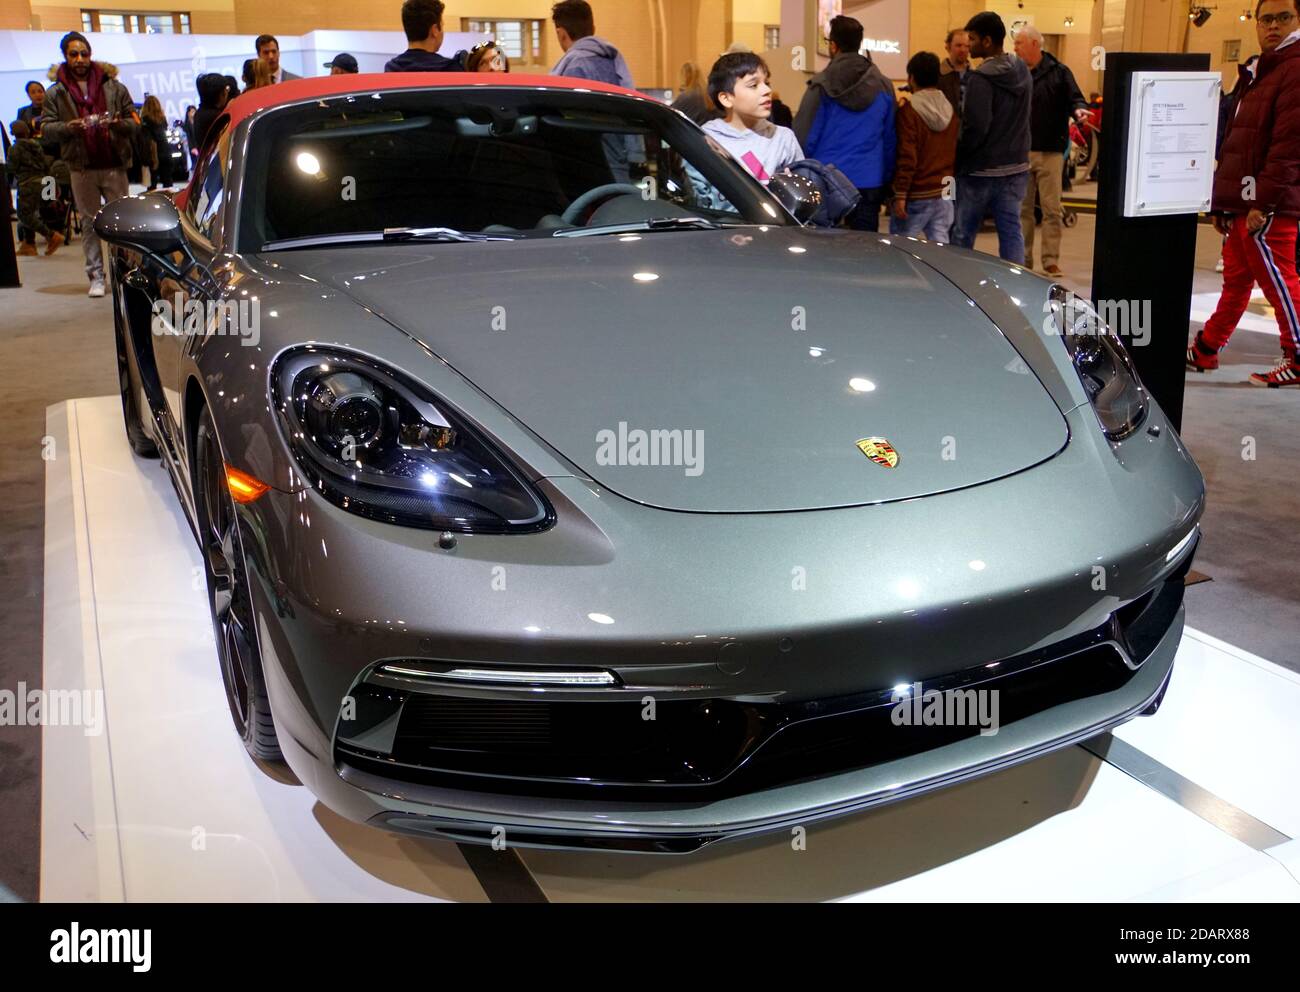 Philadelphia, Pennsylvania, U.S.A - February 9, 2019 - The front view of a grey 2019 Porsche 718 Boxster GTS convertible sports car with red top Stock Photo